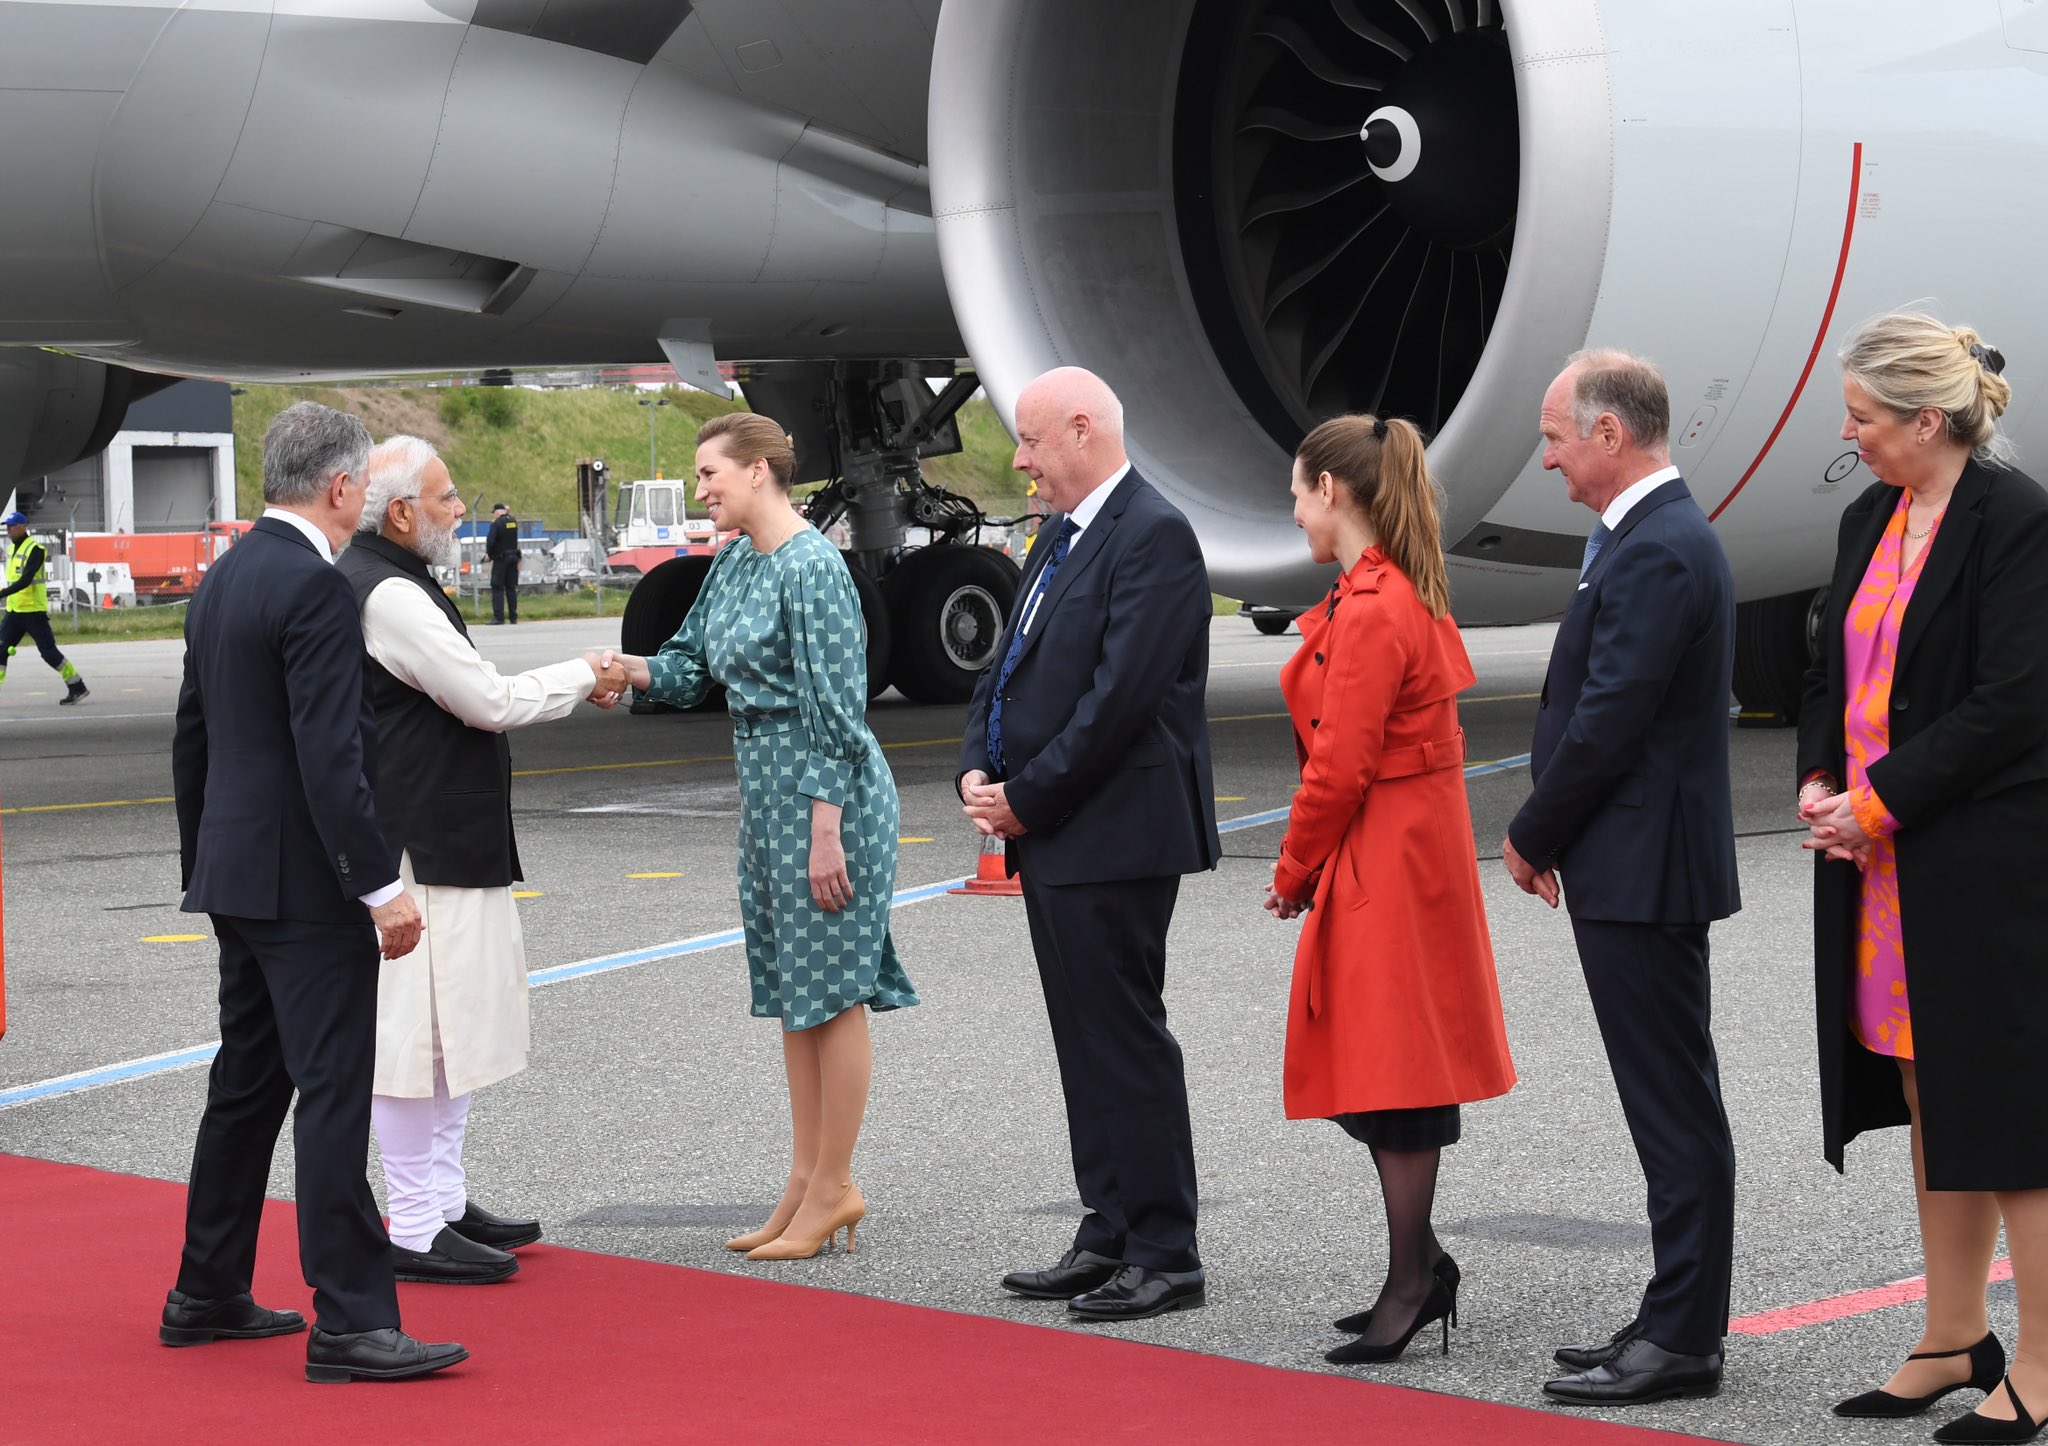 PM with Denmark 